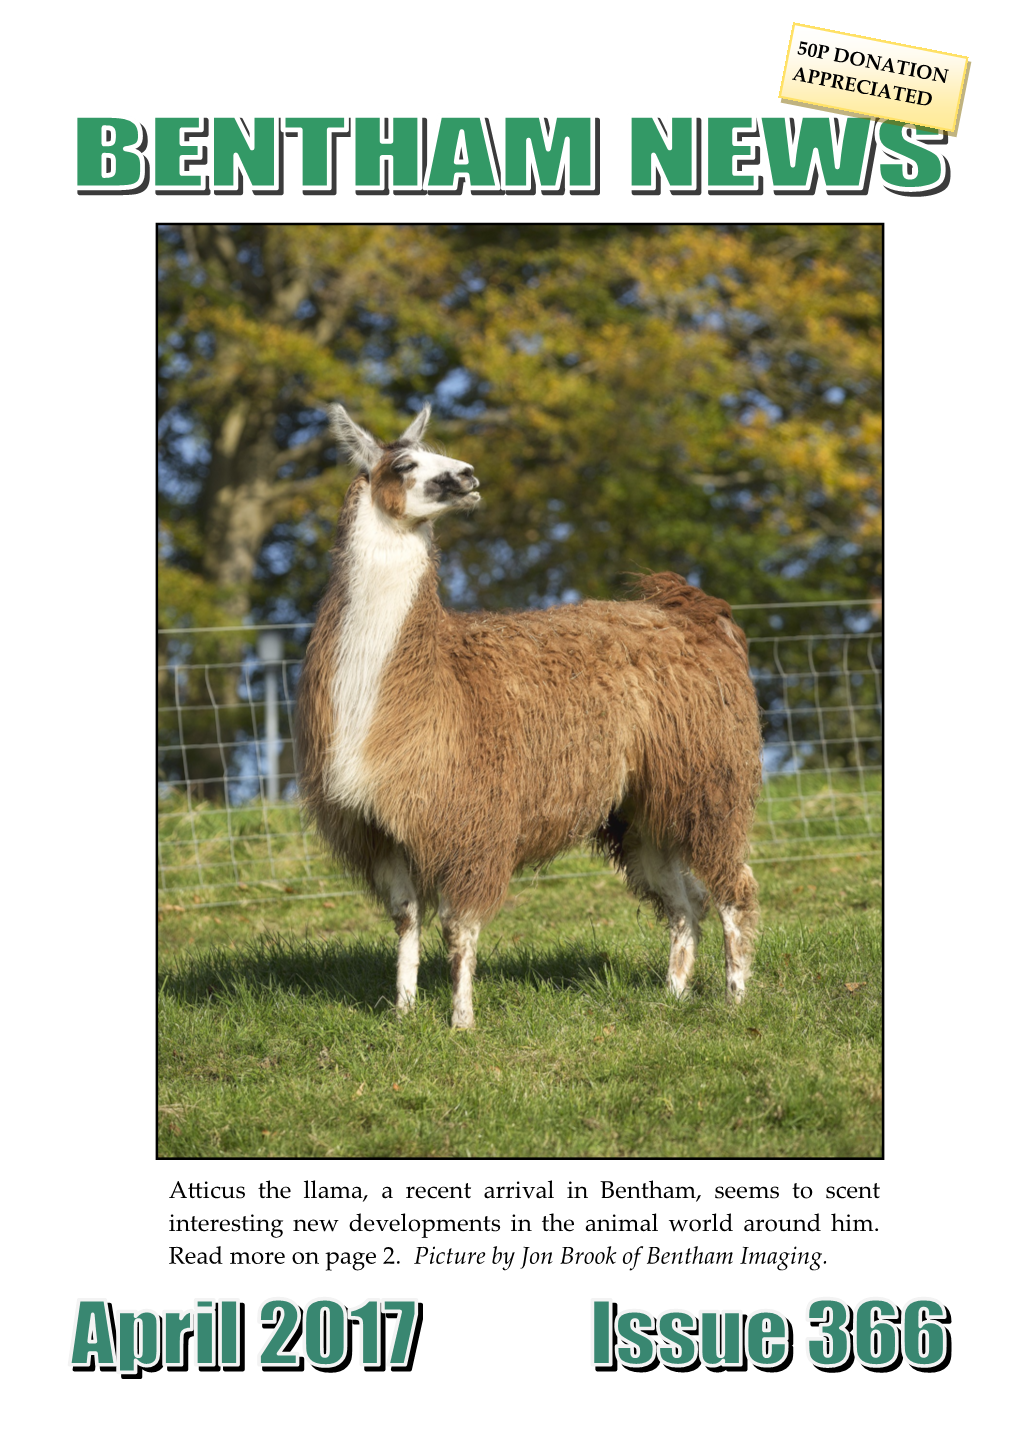 Atticus the Llama, a Recent Arrival in Bentham, Seems to Scent Interesting New Developments in the Animal World Around Him